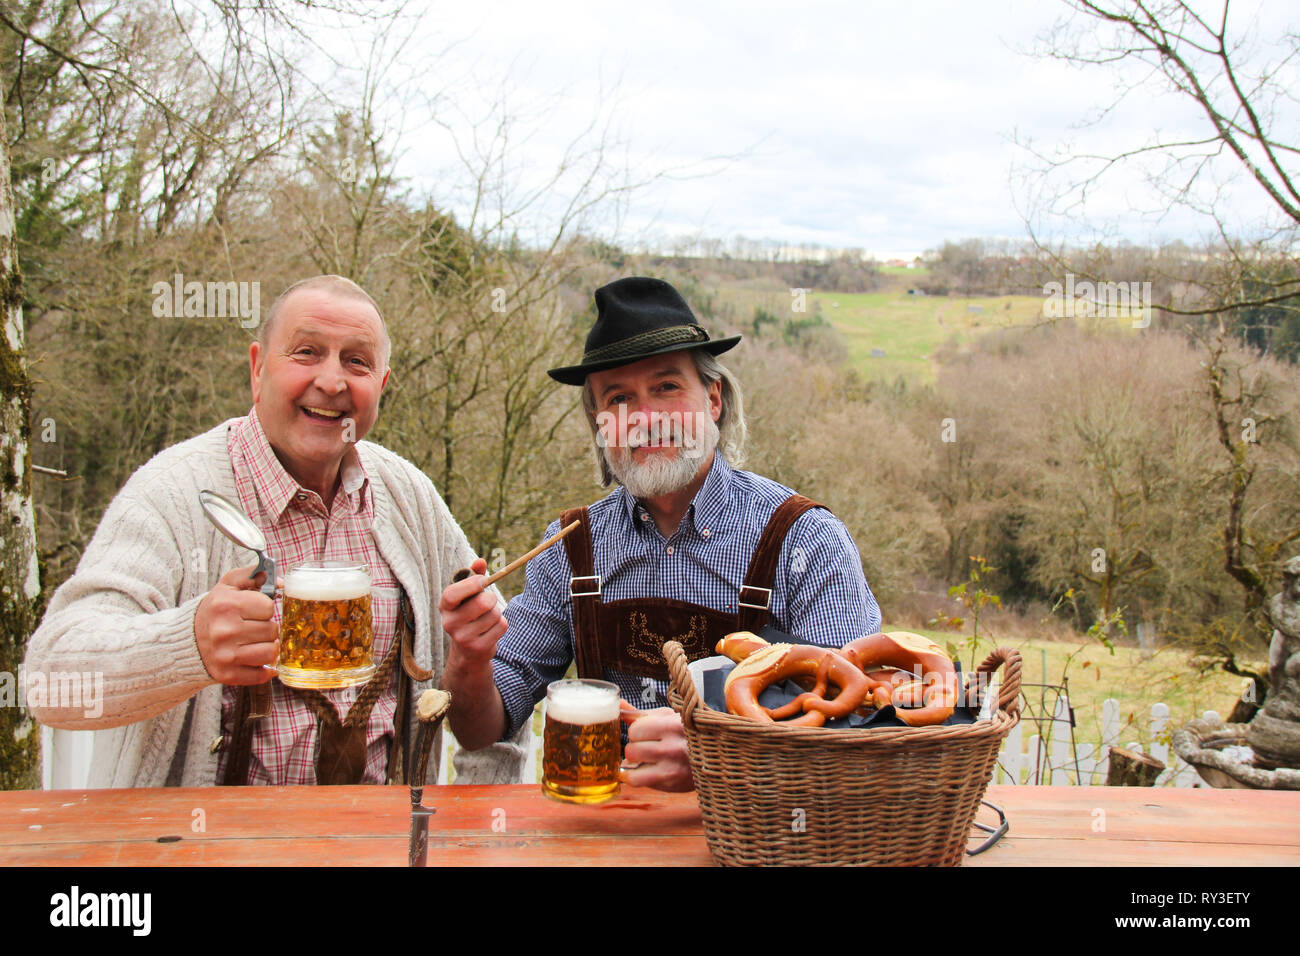 Two men wearing Bavarian October festival strive, drinking beer and feeling happy outdoors Stock Photo